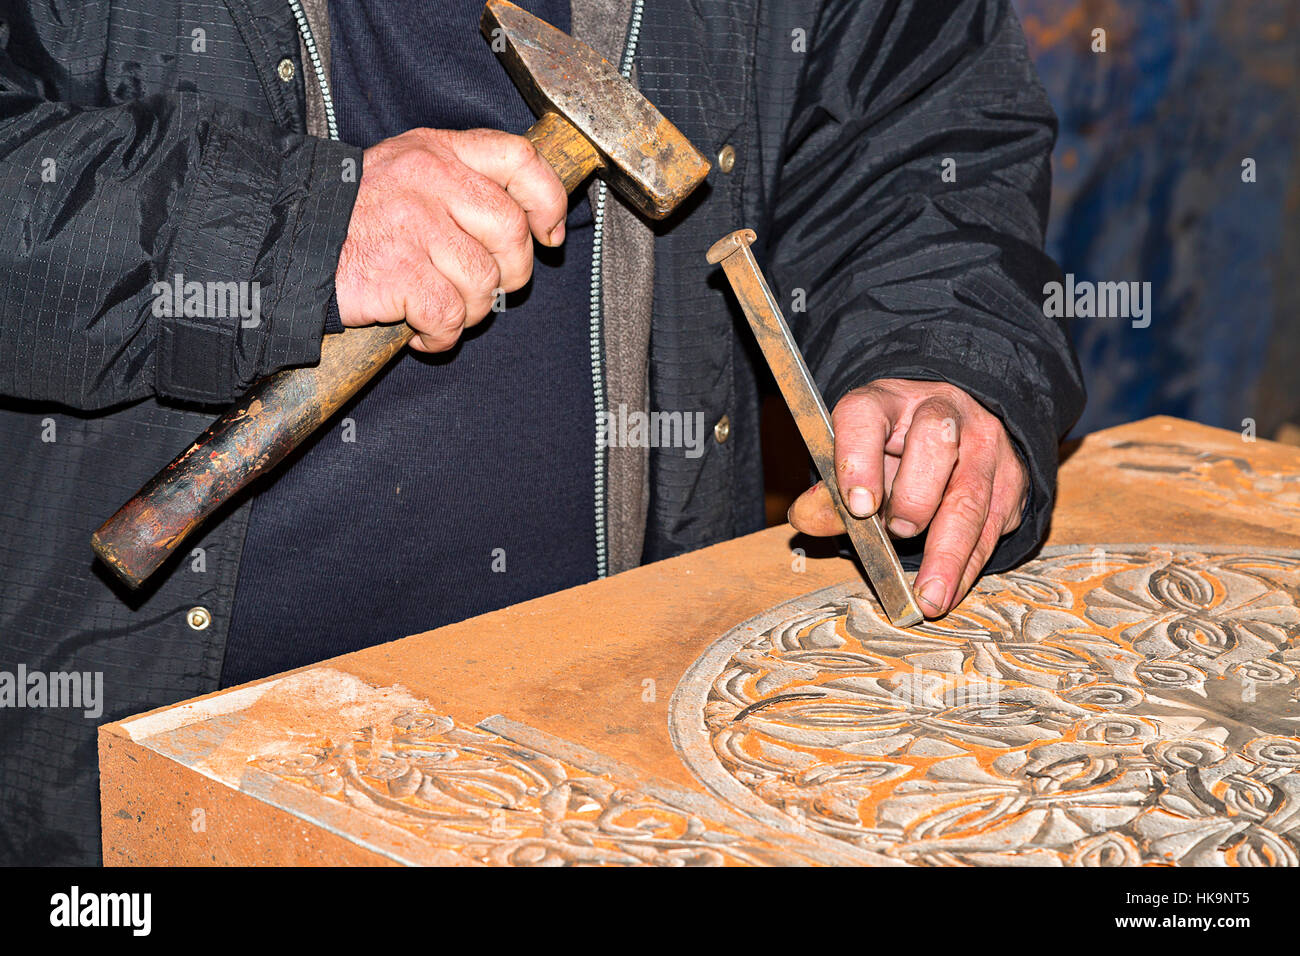 Master Stone Mason High Resolution Stock Photography and Images - Alamy